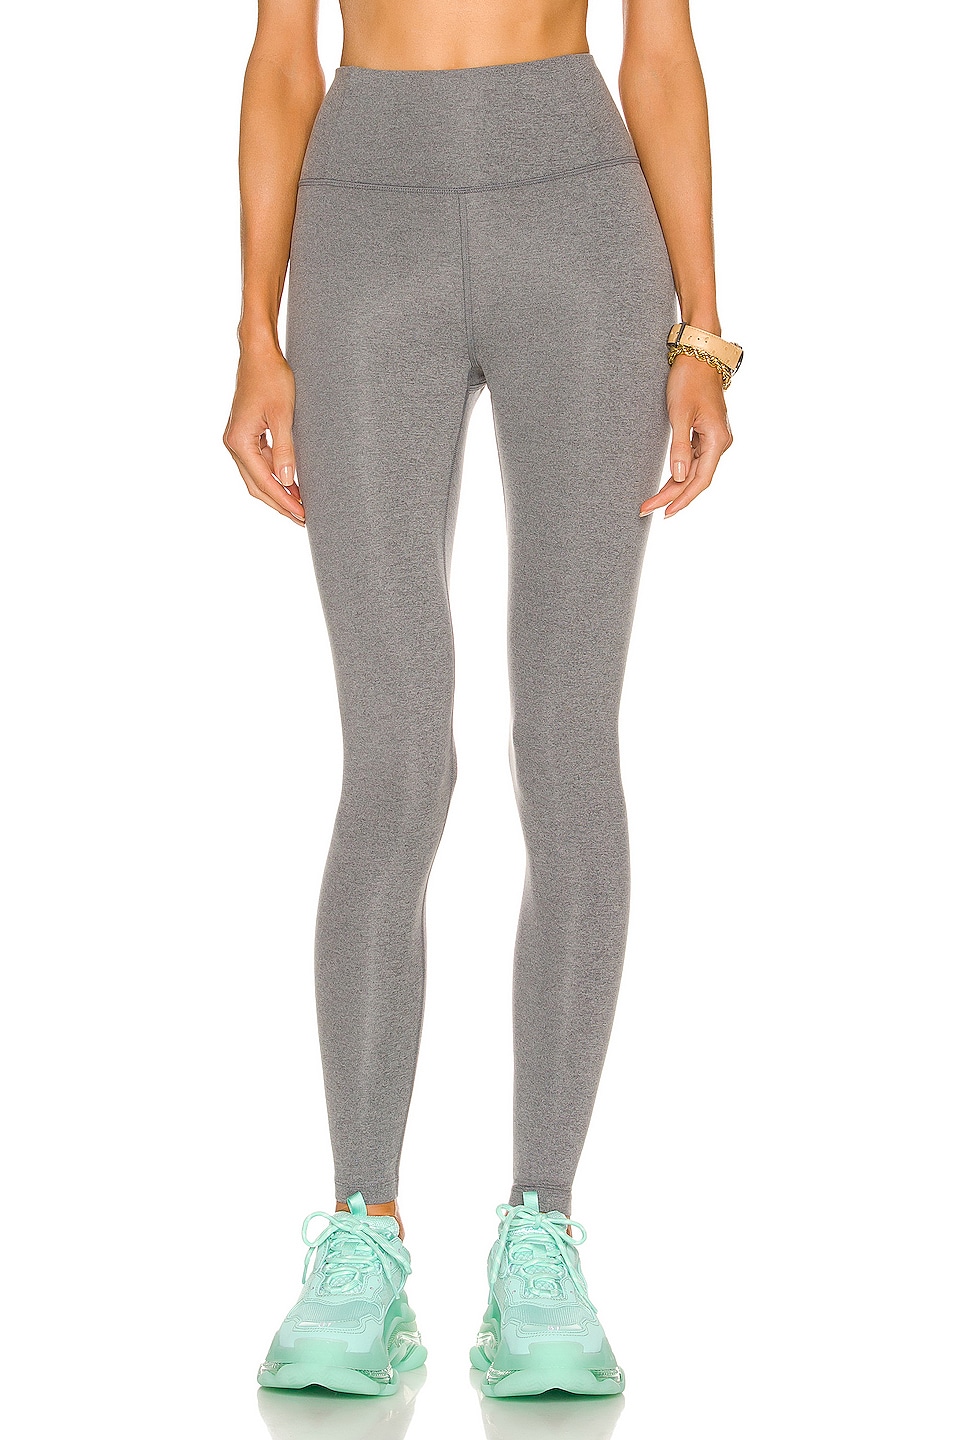 Image 1 of Girlfriend Collective Seamless High-Rise Legging in Heather Gravel